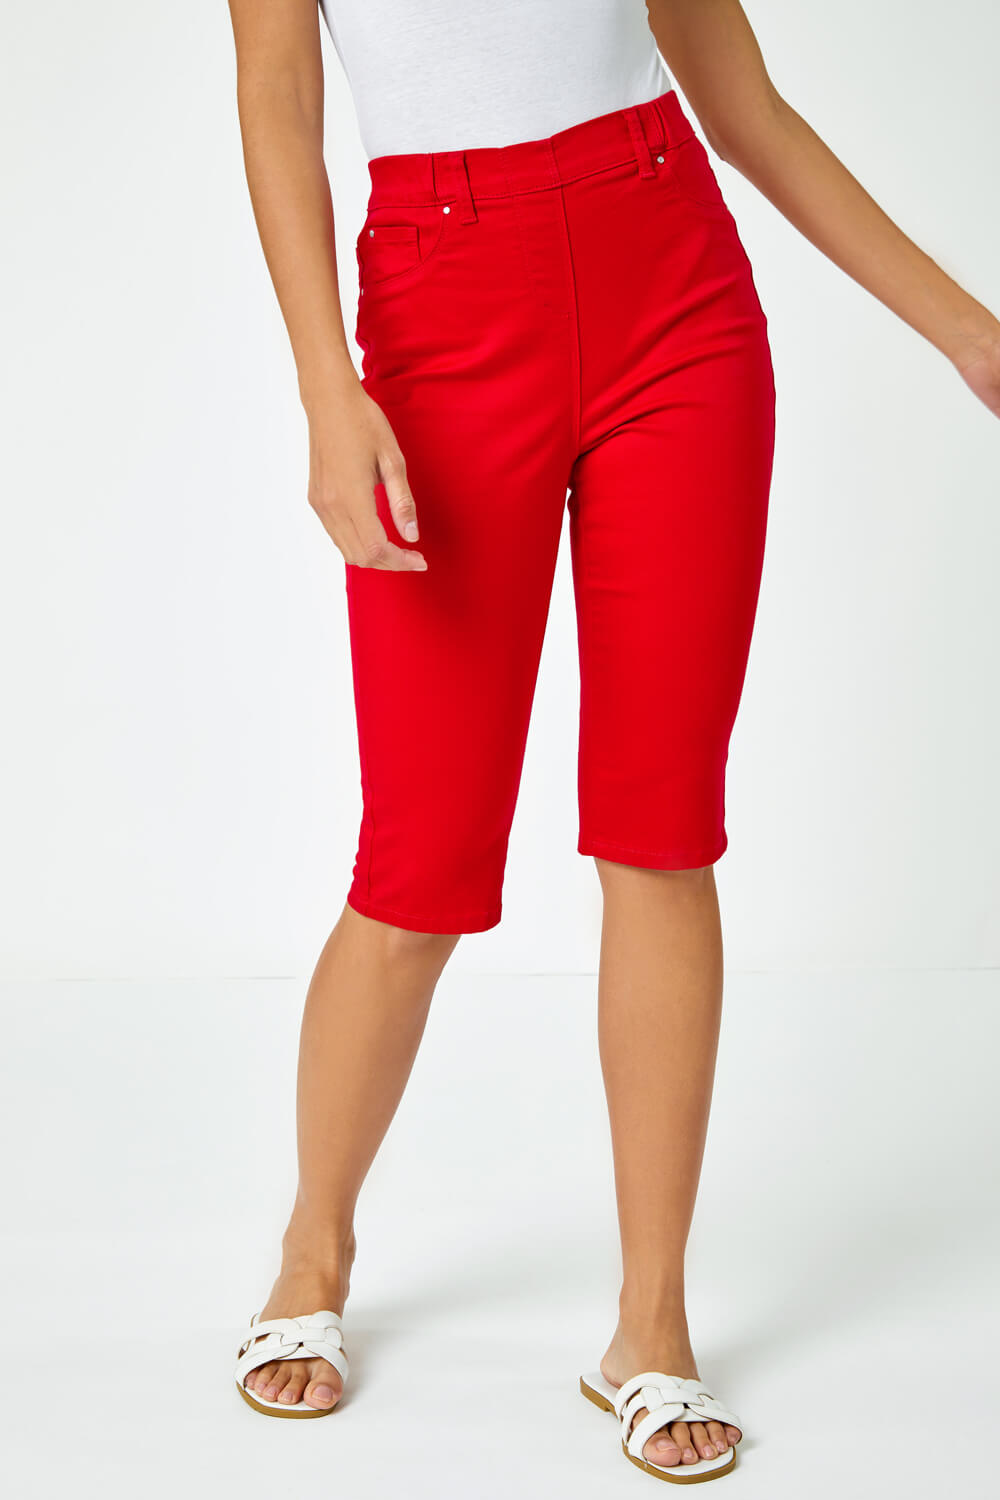 Red Denim Stretch Knee Length Pedal Pusher, Image 5 of 5